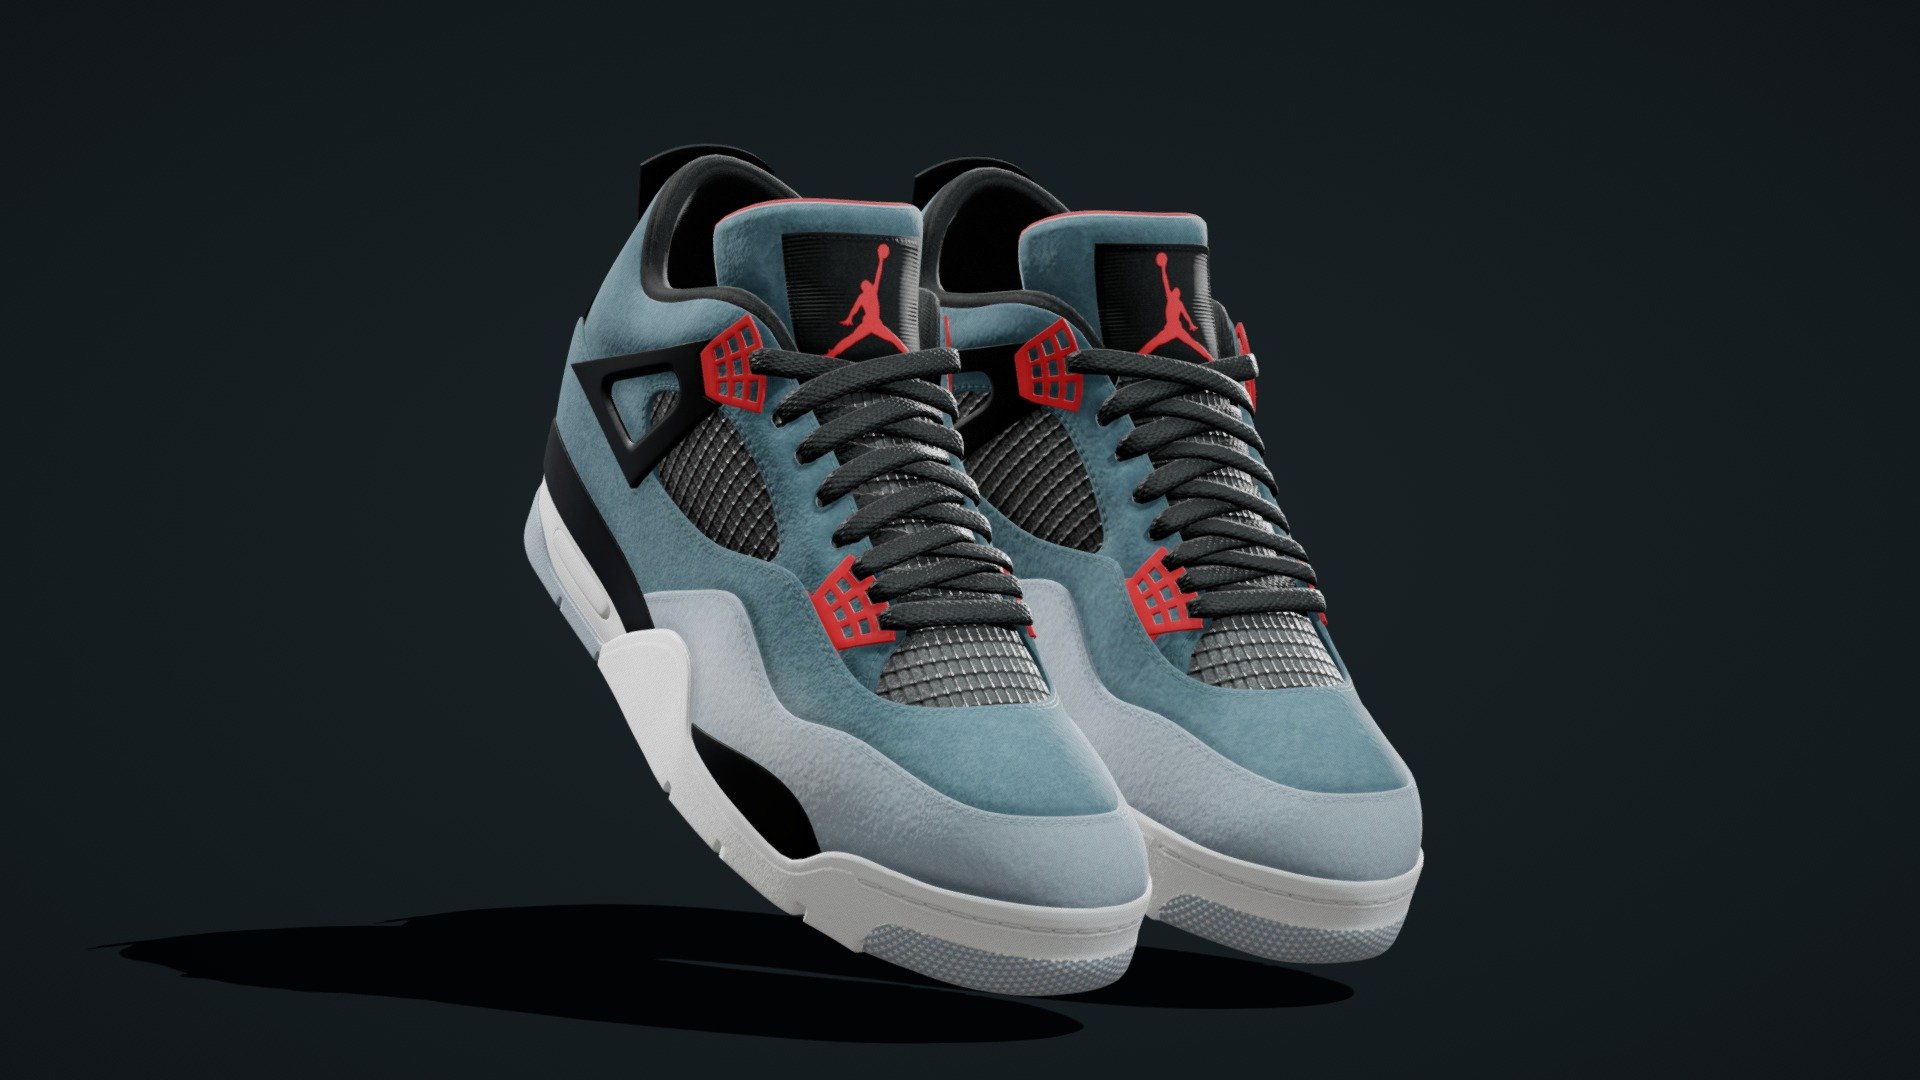 Here is a pair of high qulity Nike Shoes
Air Jordan 4

2 Materals 
4k Textures
140000 Poly

Great for any render project

Feel free to Comment or contact for any query 3d model